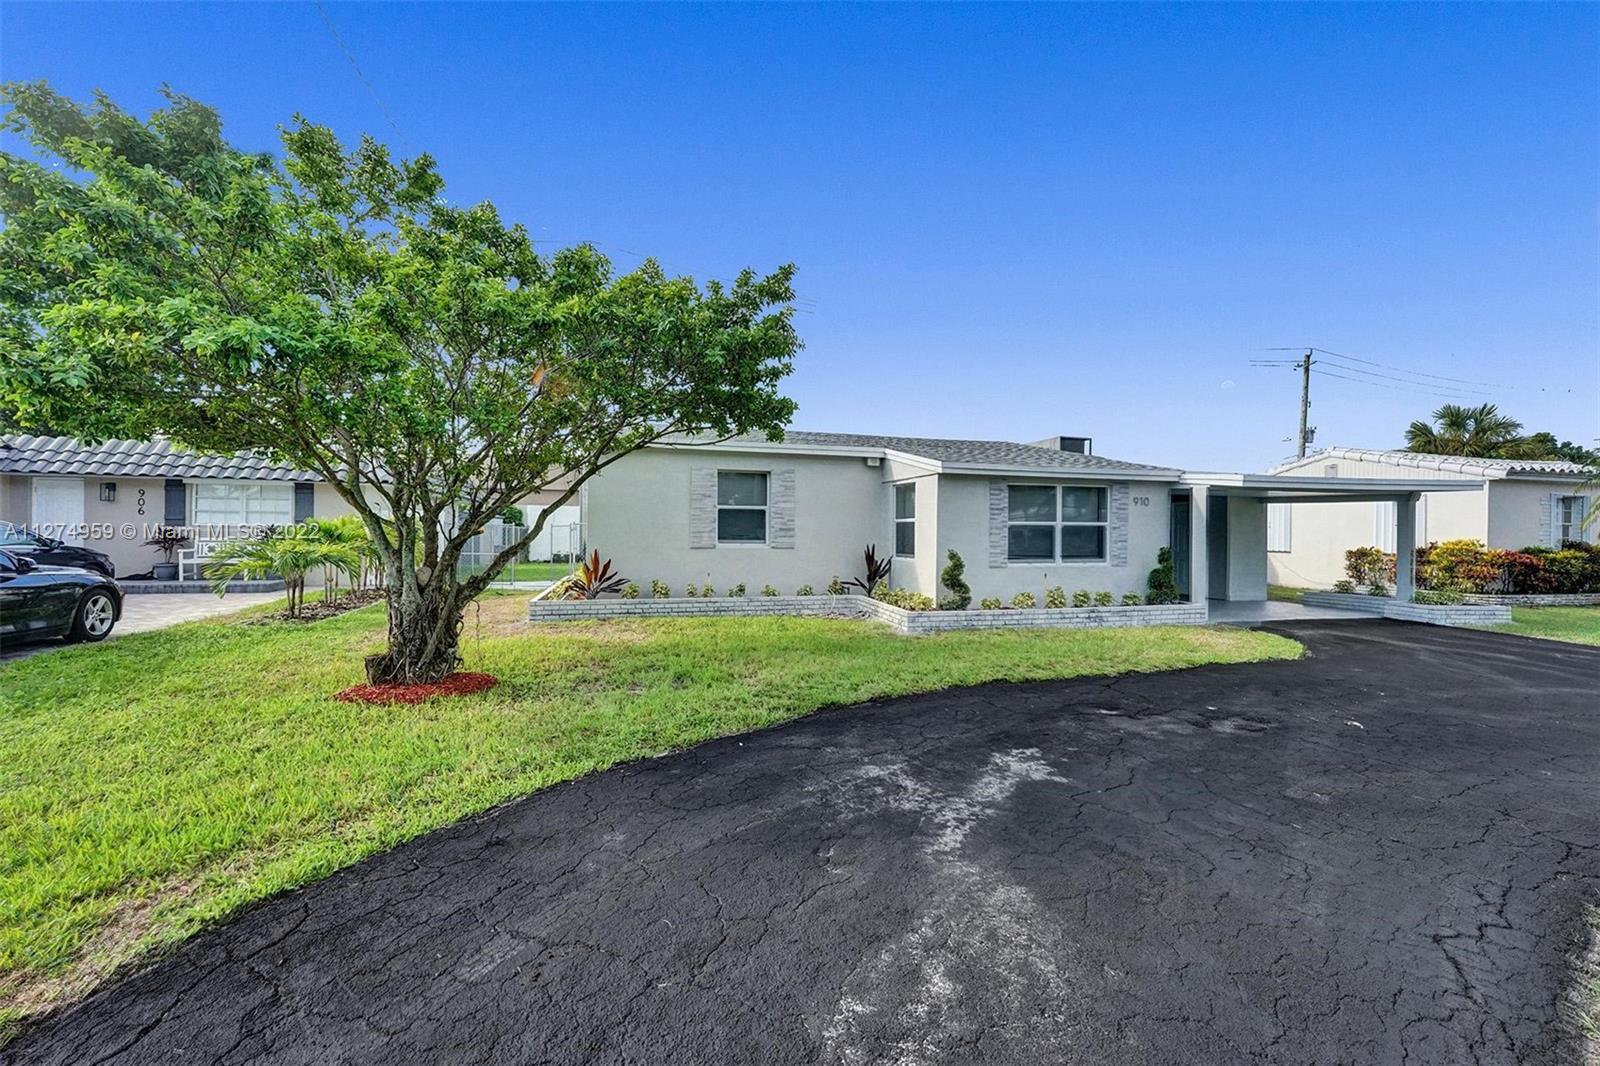 BEAUTIFULLY FULLY REMODELED 3 BEDROOMS 2 BATHROOMS SINGLE-FAMILY HOME WITH CARPORT, IN THE HEART OF 